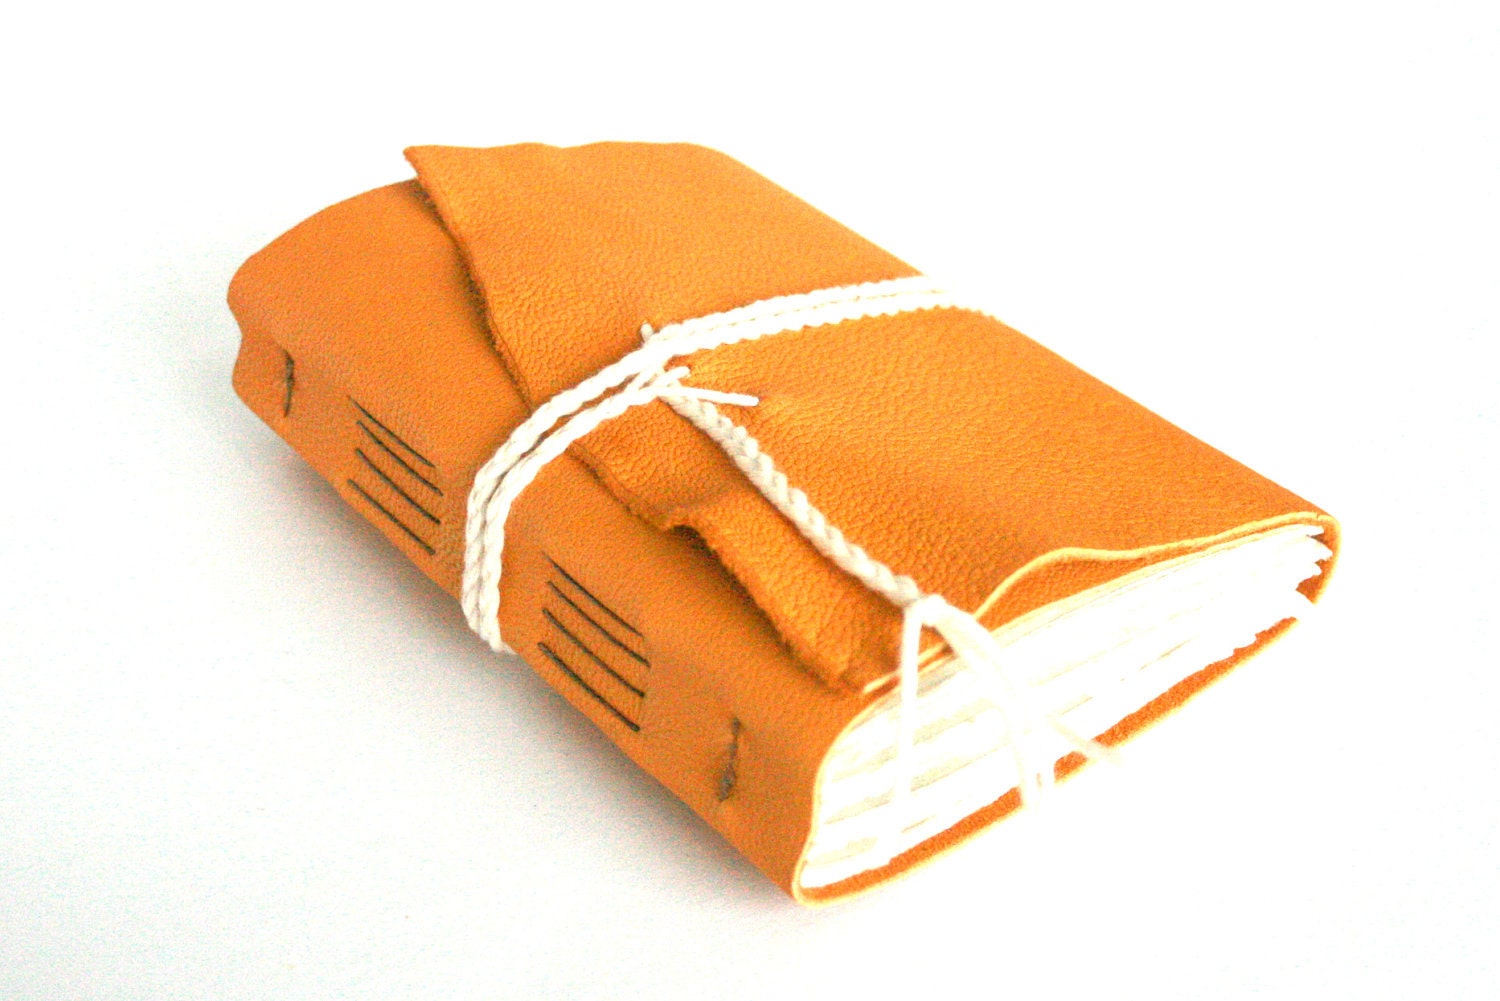 Leather Journal, Gold Yellow, Hand-Bound 4.5 x 6 Journal by The Orange Windmill on Etsy